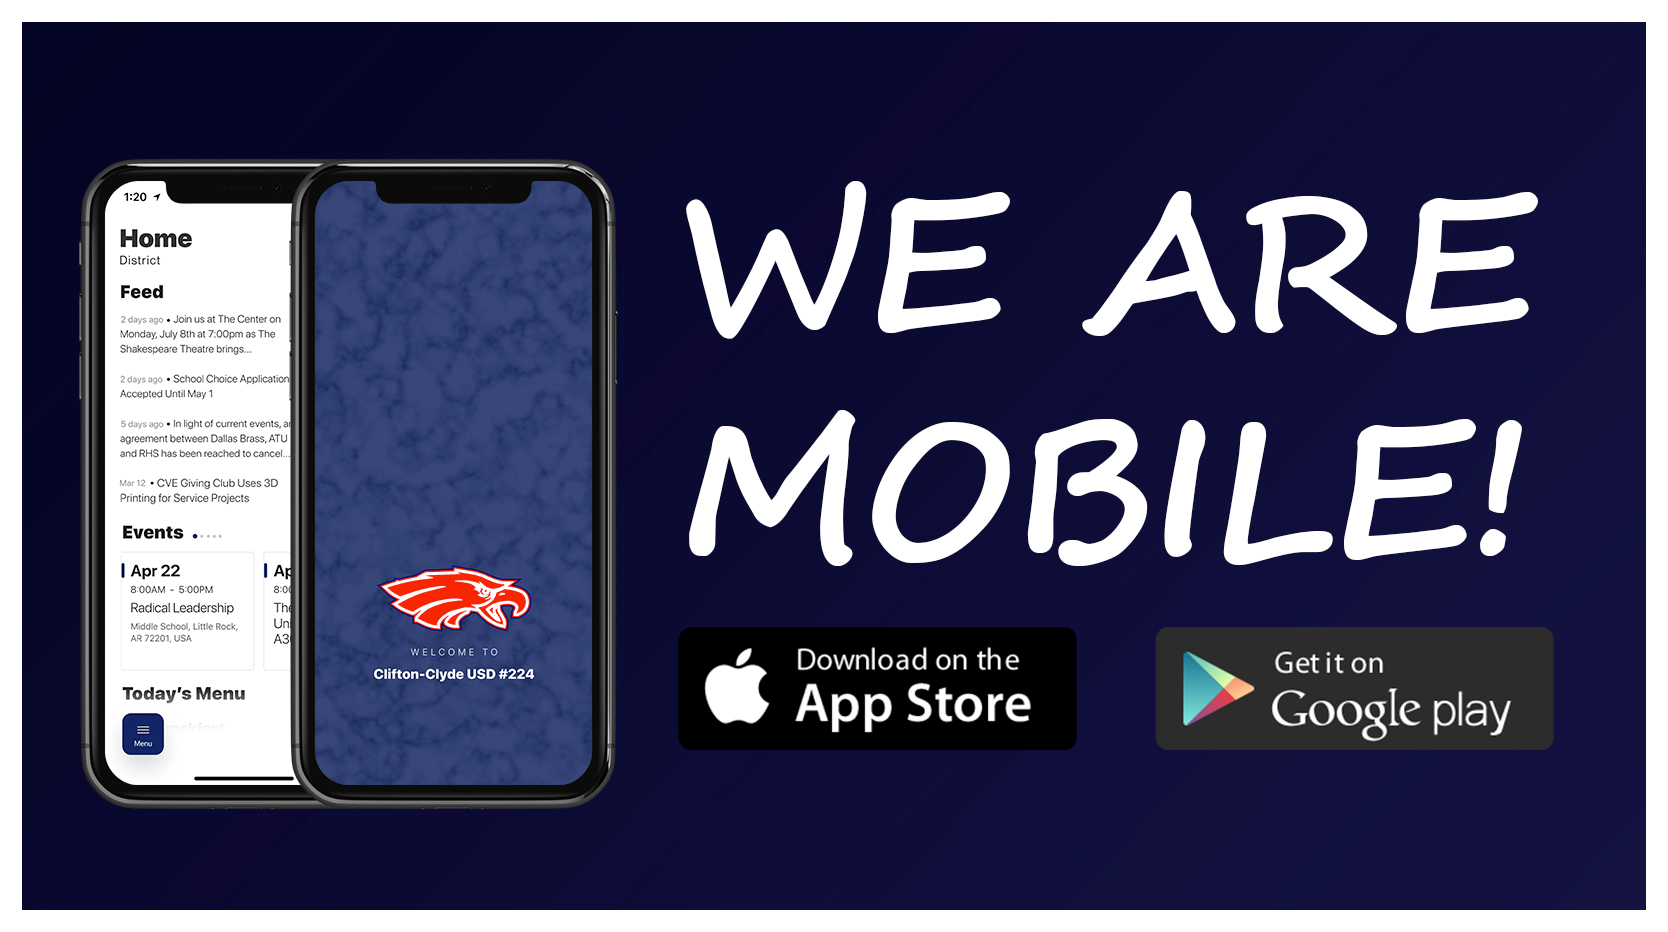 We are mobile! Download on the App Store or Get it on Google Play